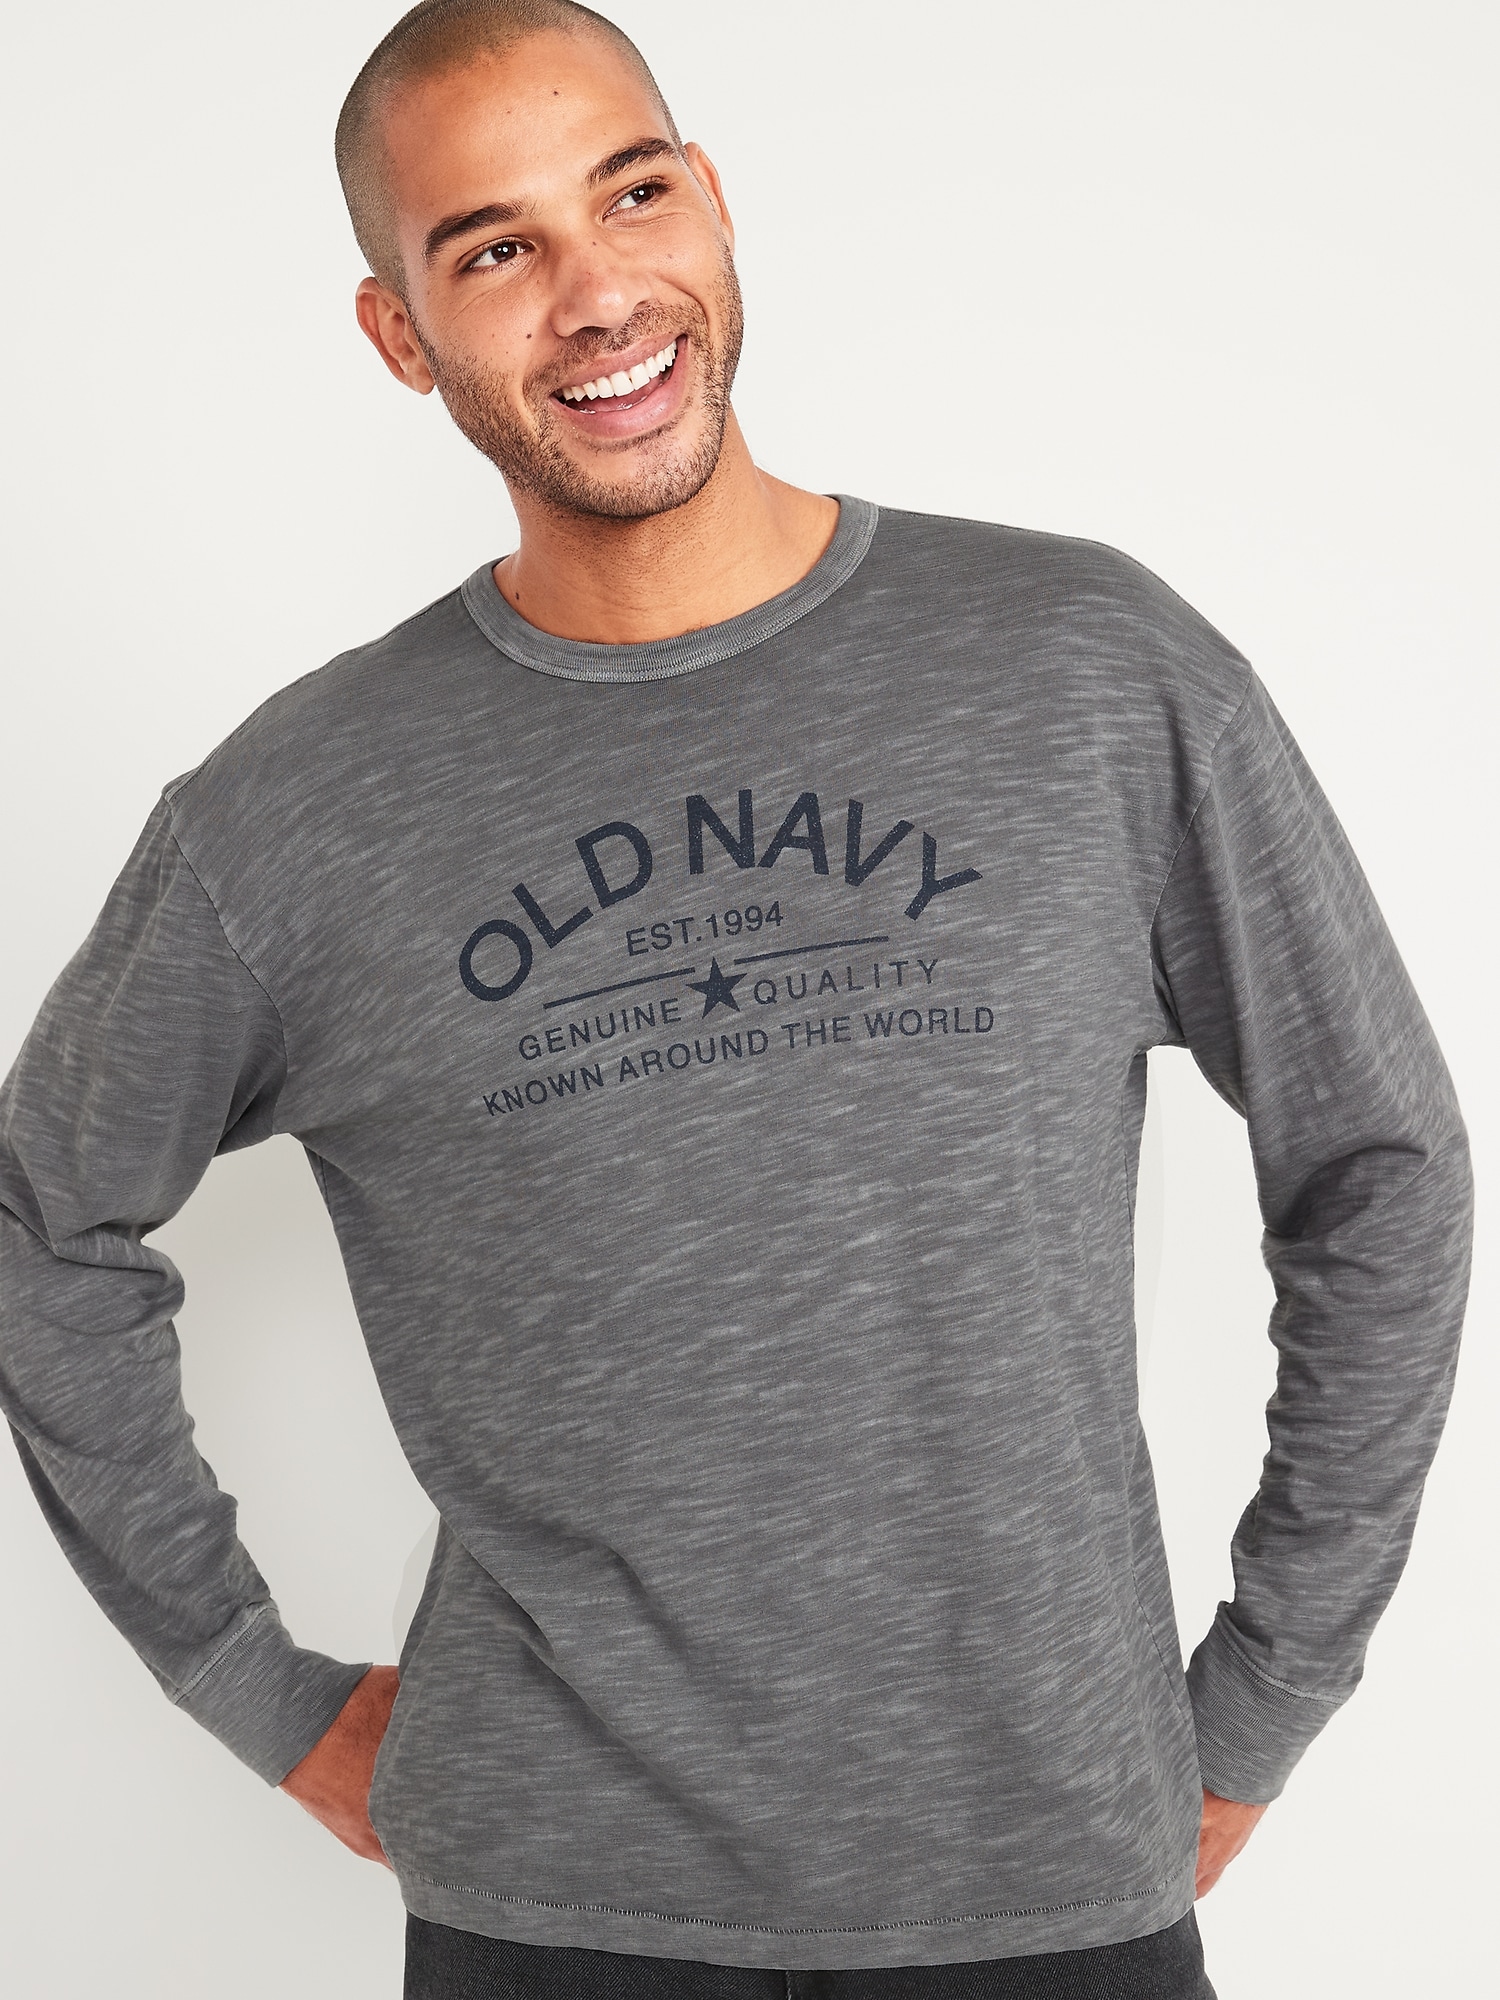 Garment-Dyed Graphic Tee for Men, Old Navy